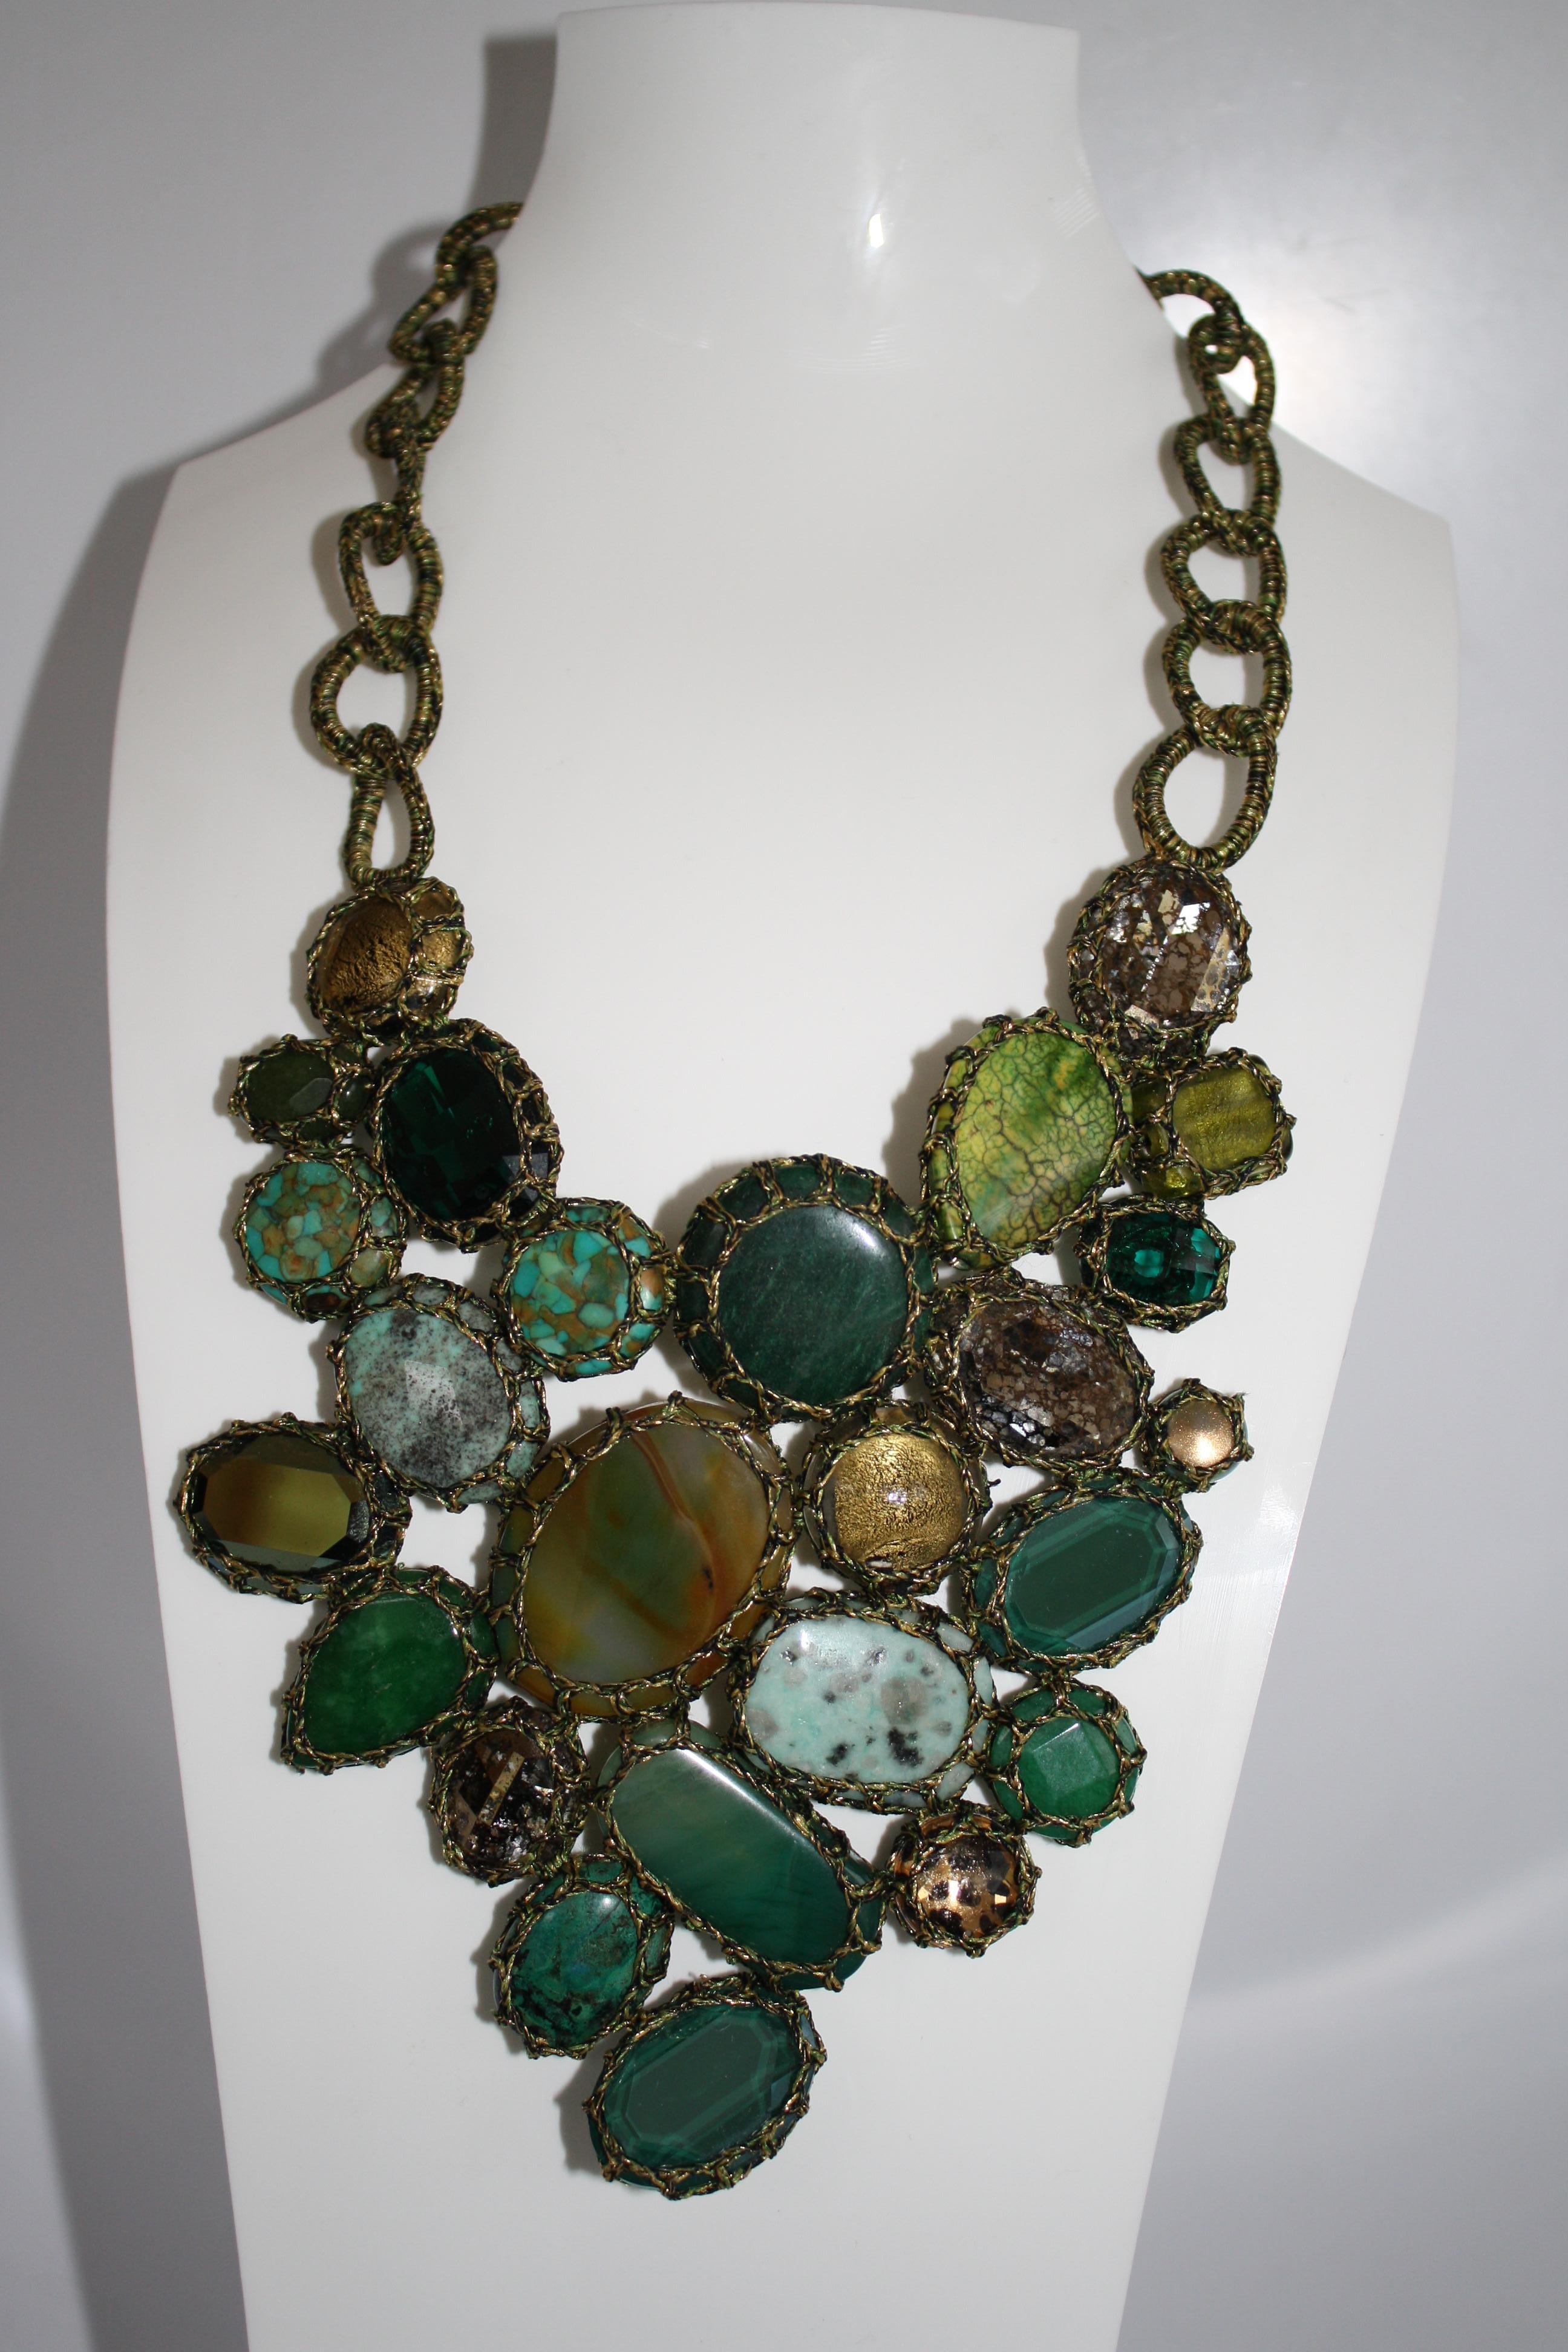 From Boks & Baum Paris, this fabulous statement piece is made with Lurex, Rayon, Swarovski Crystal, African Turquoise, Agate, Amazonite, Aventurine, Chrysoprase, Jade, and Murano glass.    

18